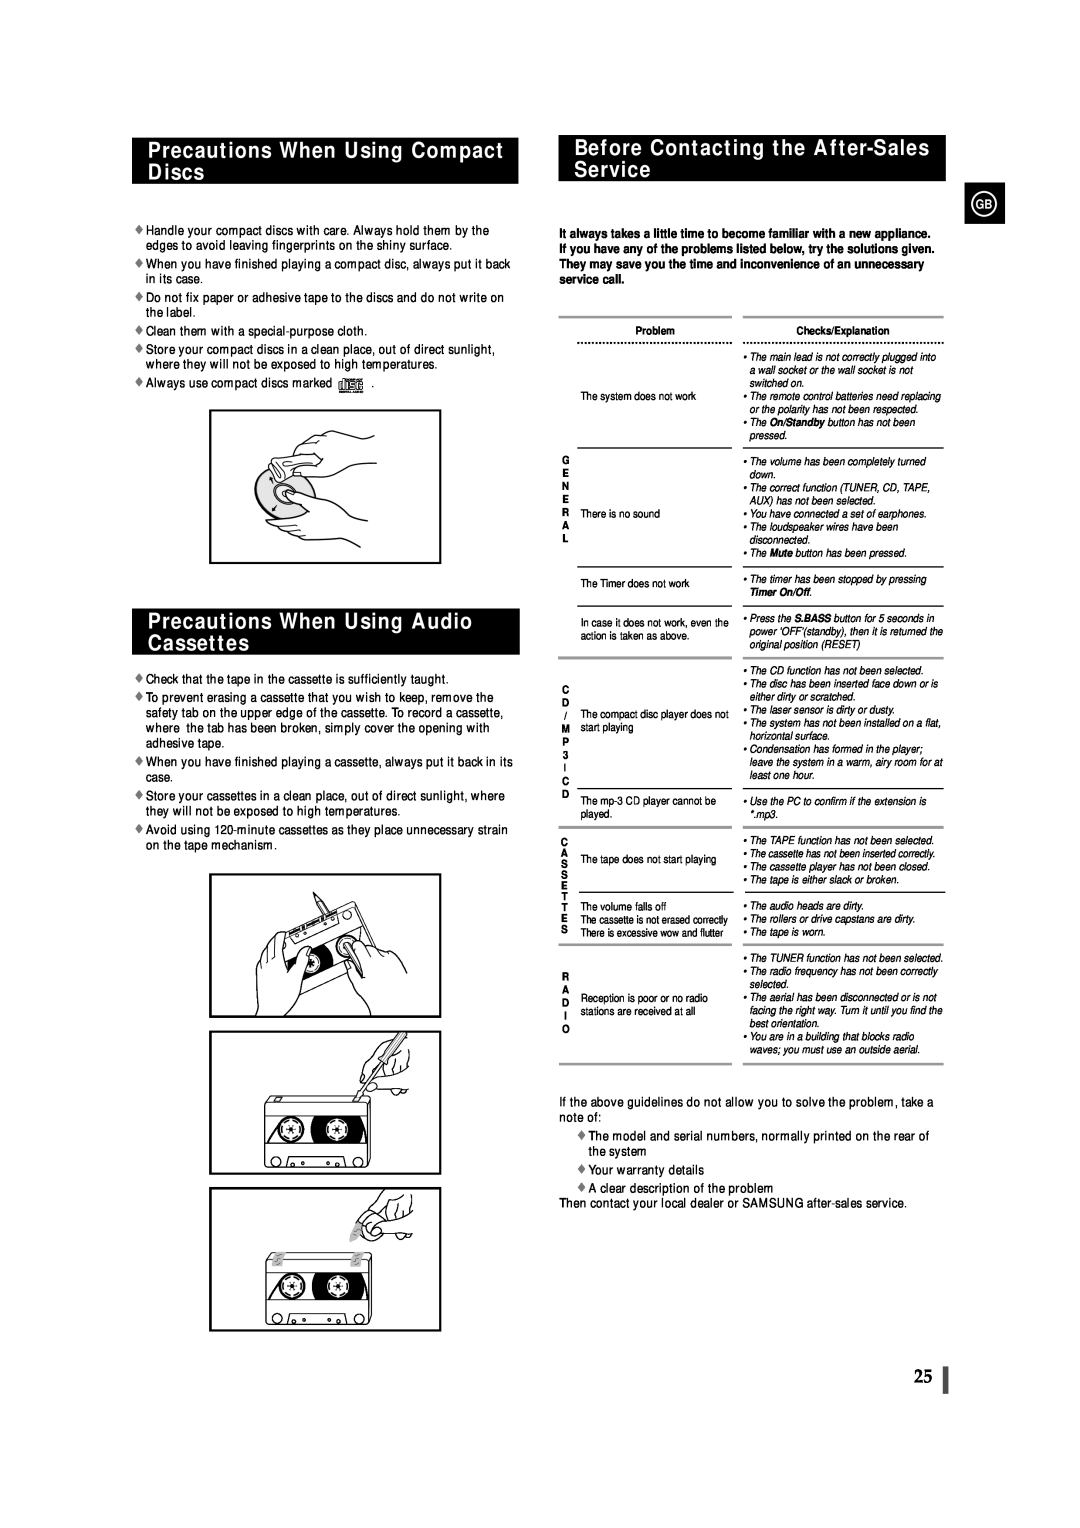 Samsung MAX-ZL65GBR instruction manual Precautions When Using Compact Discs, Before Contacting the After-Sales Service 